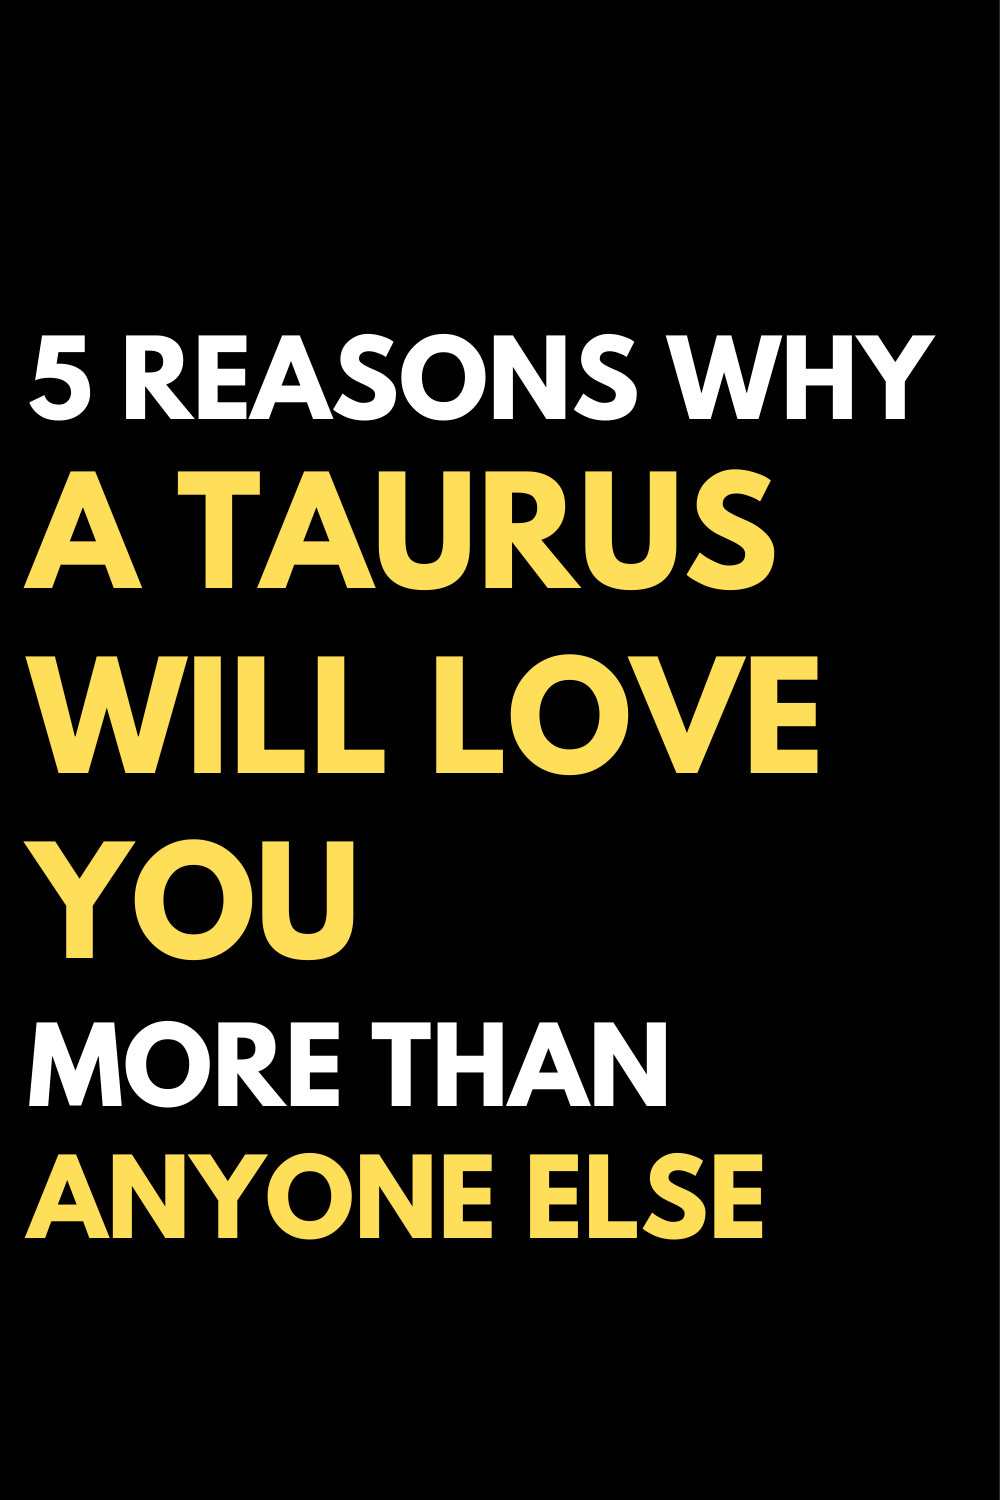 5 reasons why a Taurus will love you more than anyone else